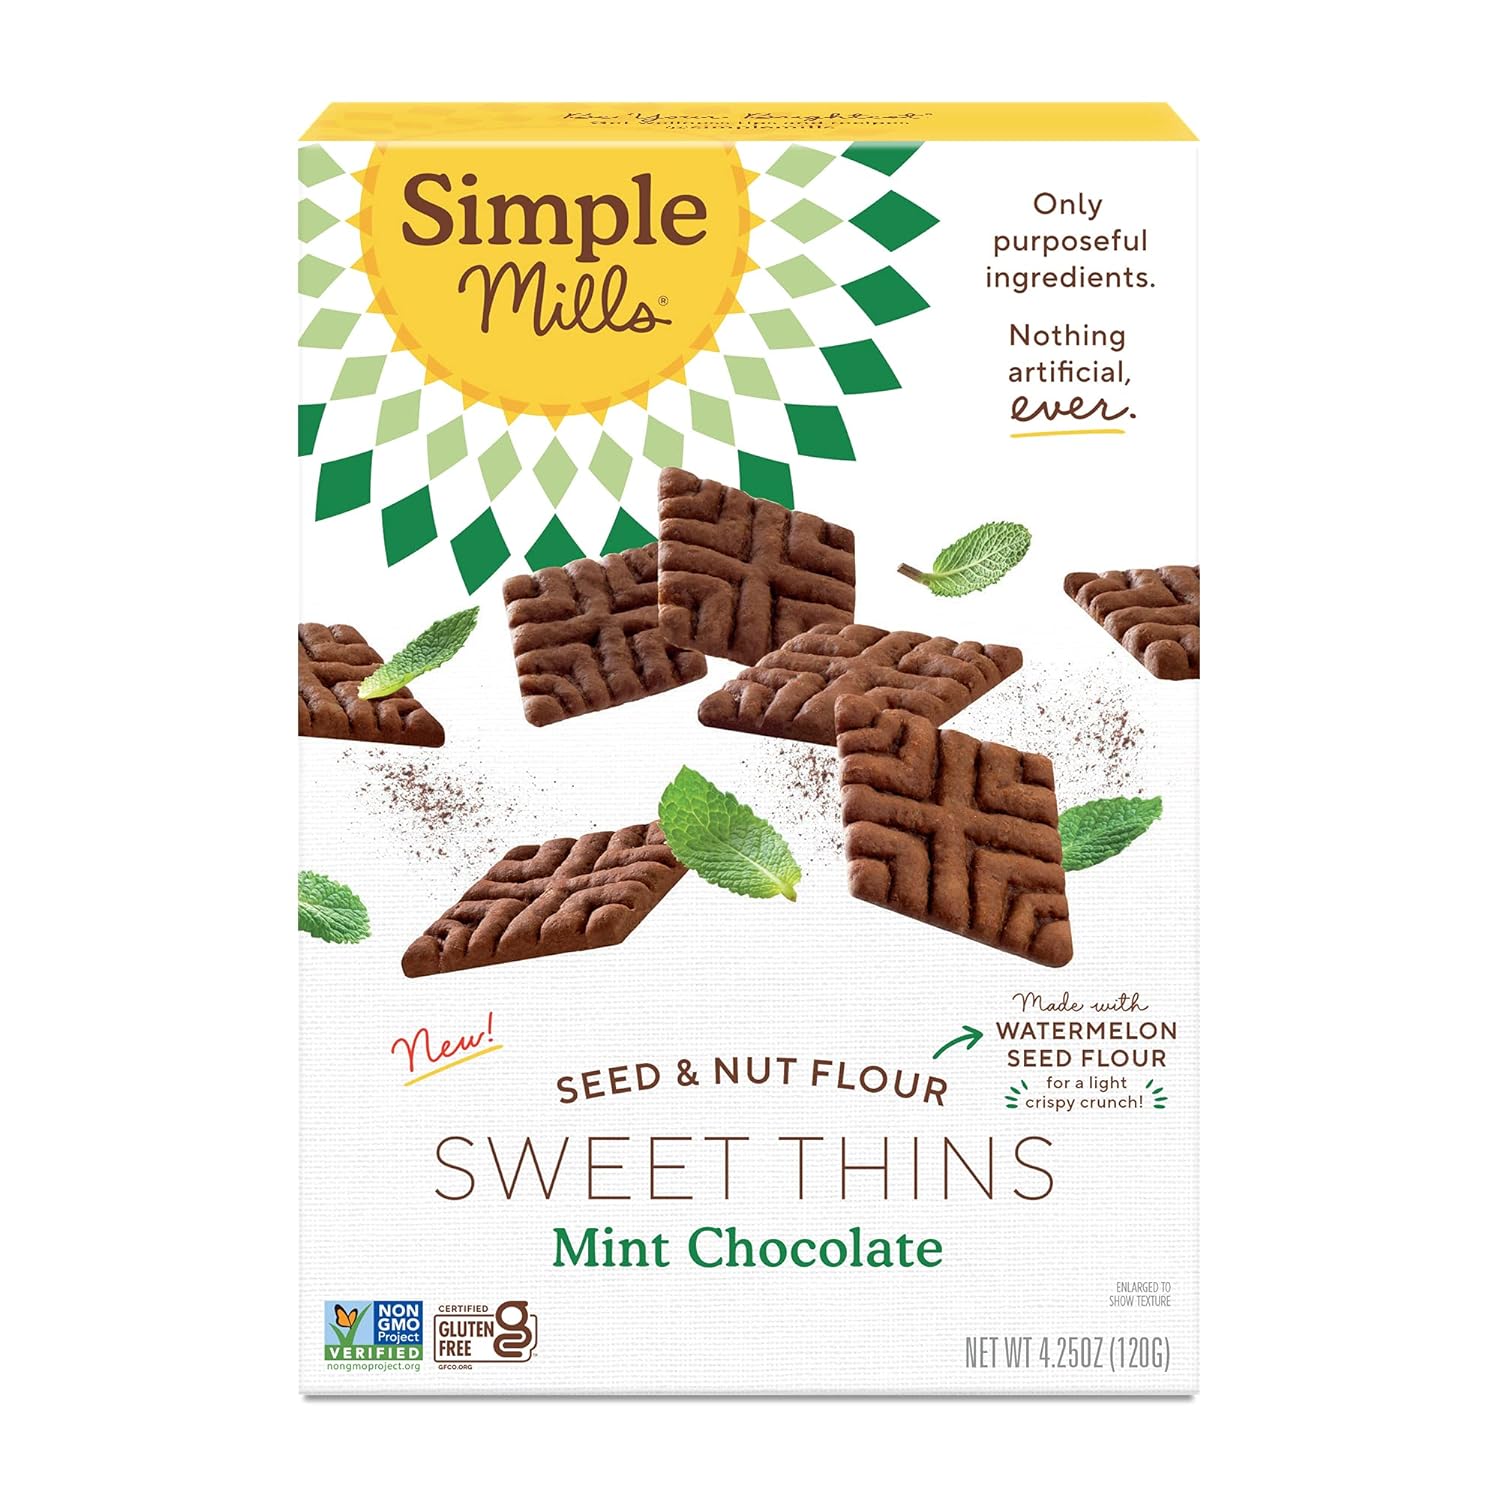 Simple Mills Sweet Thins Cookies, Seed and Nut Flour, Mint Chocolate - Gluten Free, Paleo Friendly, Healthy Snacks, 4.25 Ounce (Pack of 1)